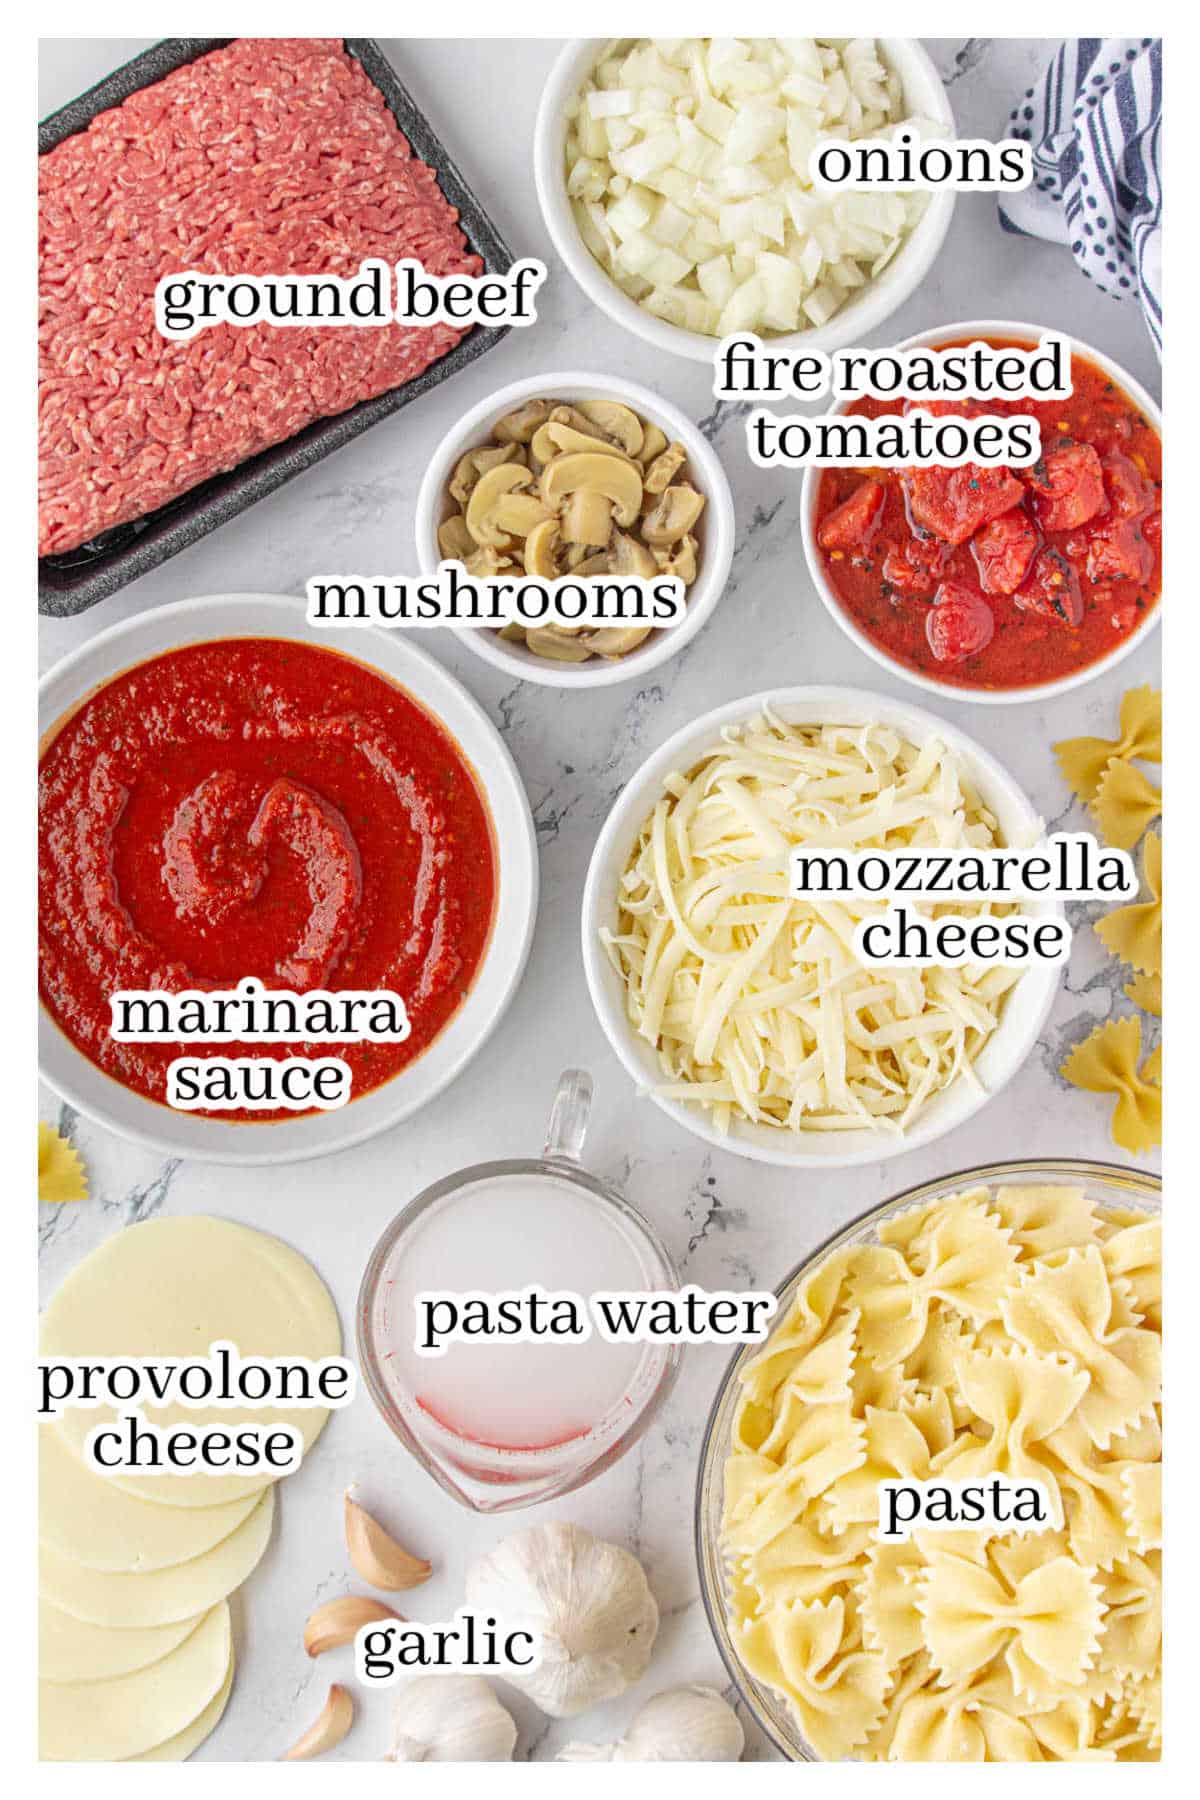 All of the ingredients needed to make the pasta recipe, with print overlay for clarification.